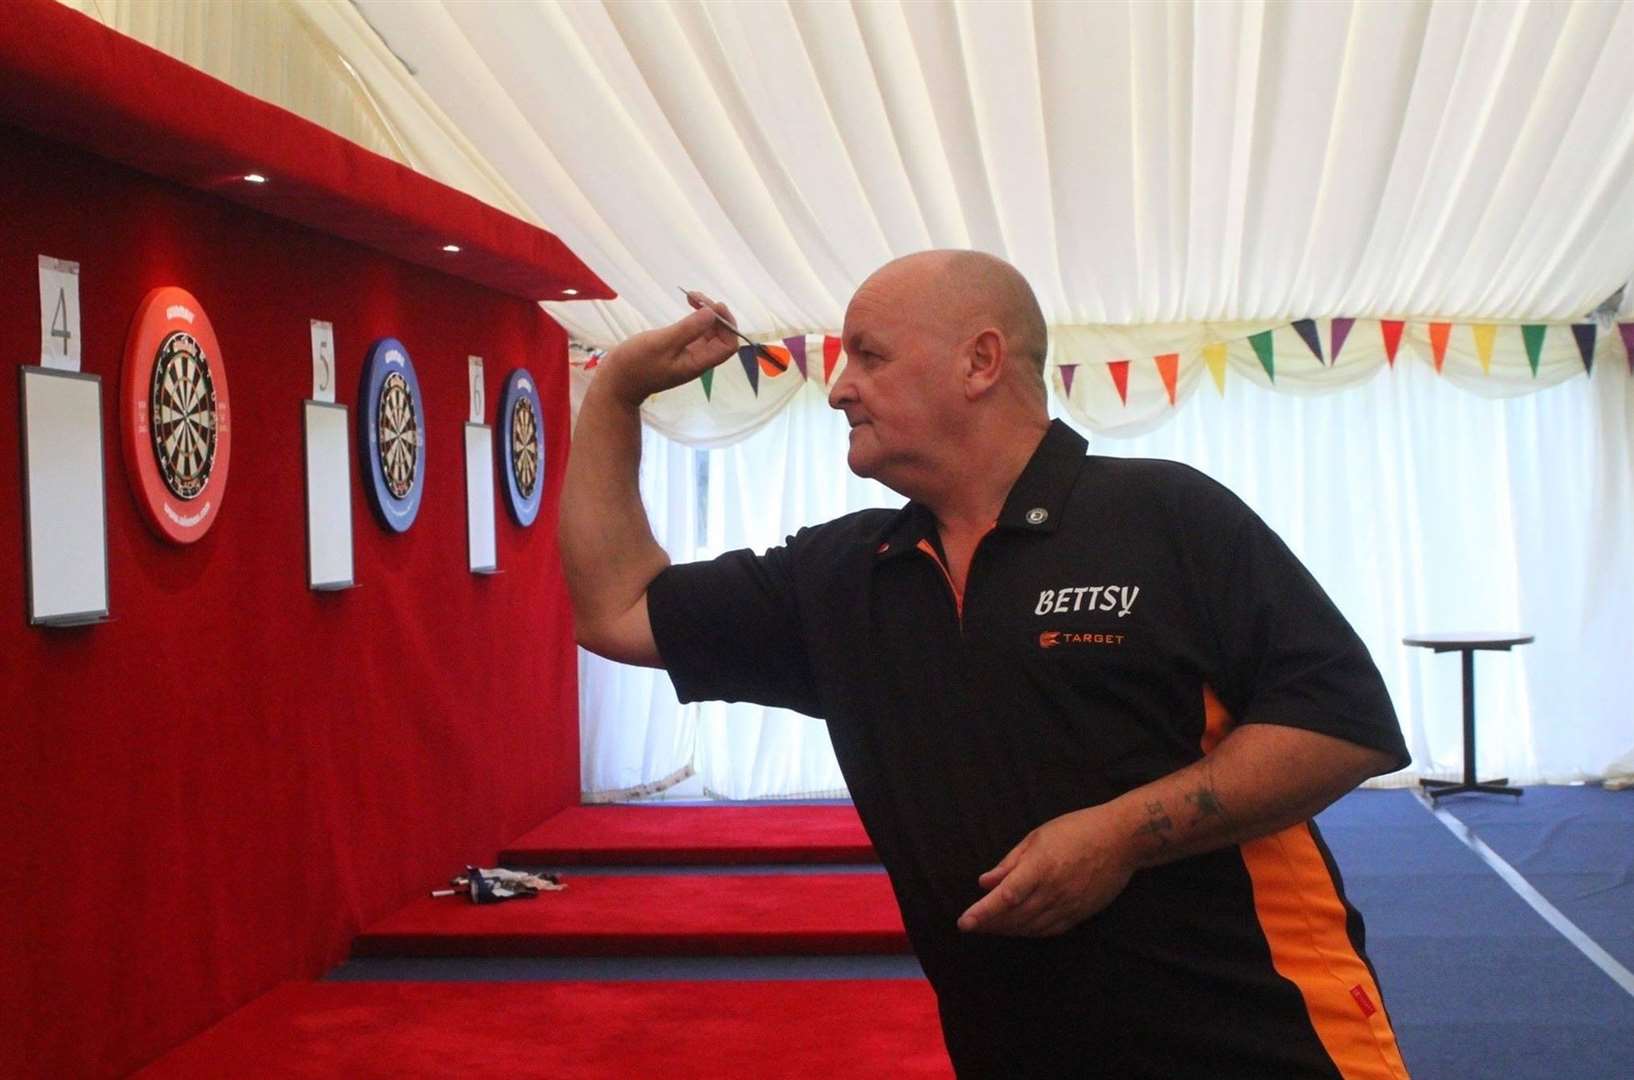 Andy Betts was a popular character on the Kent darts scene